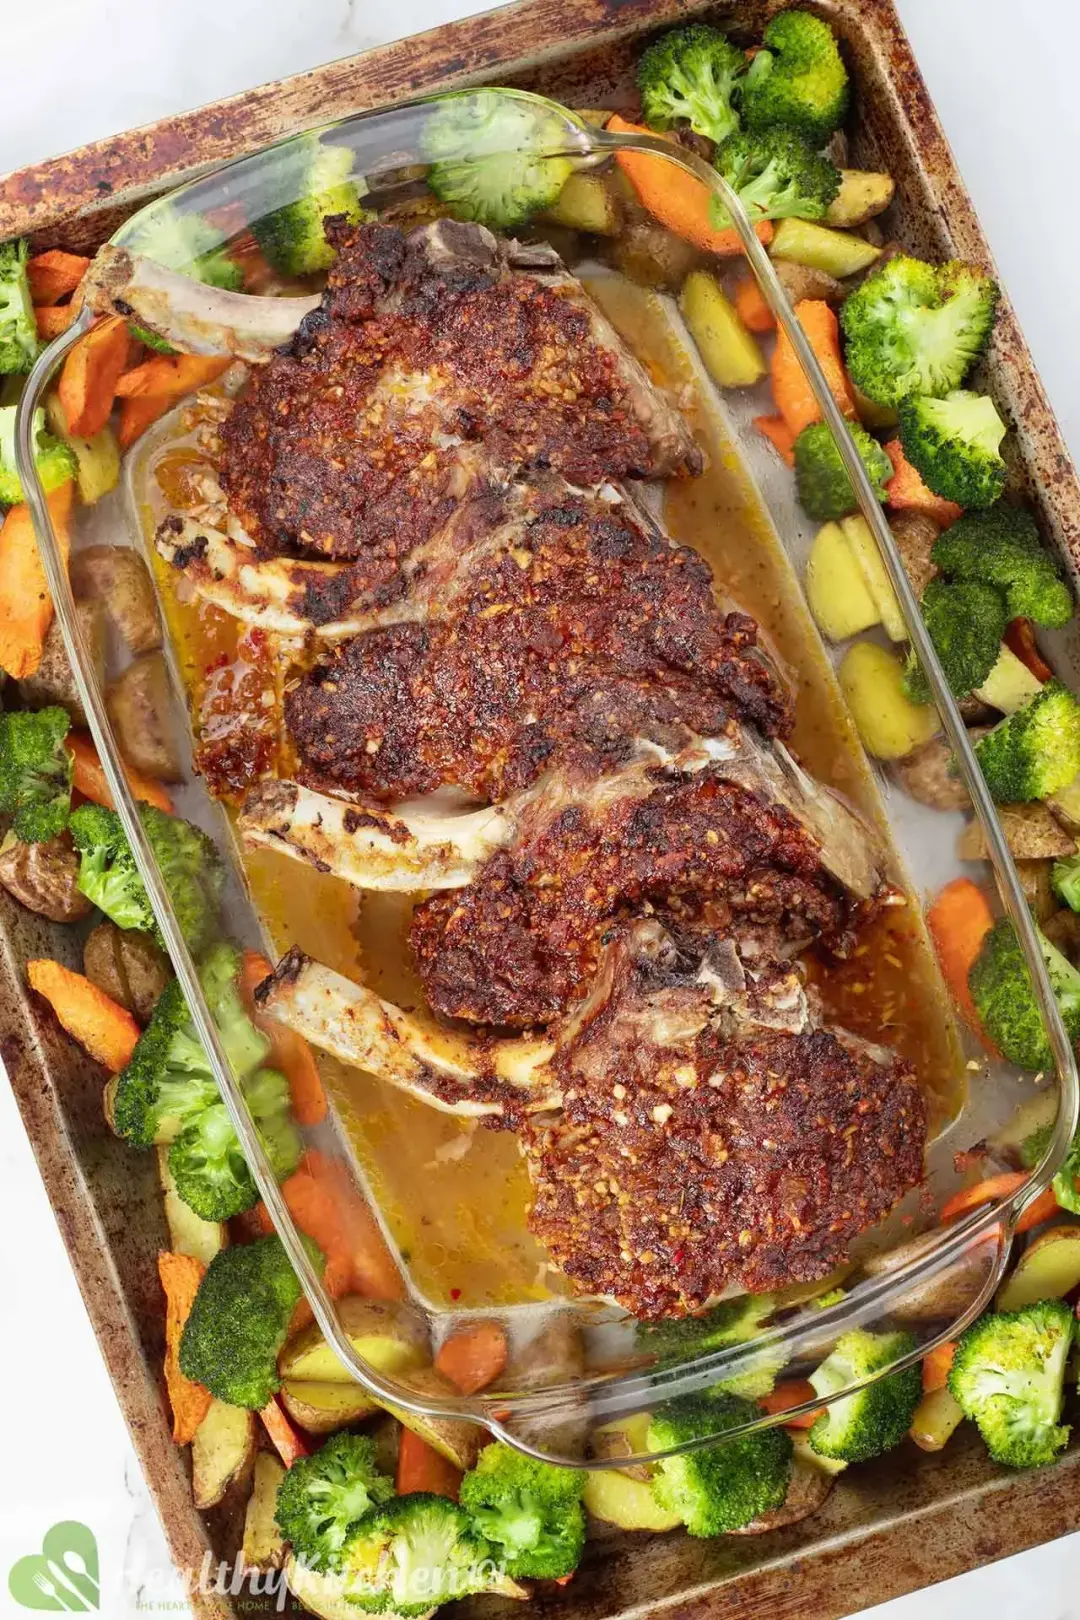 Four golden pork chops in a glass baking dish on a roasted veggie tray